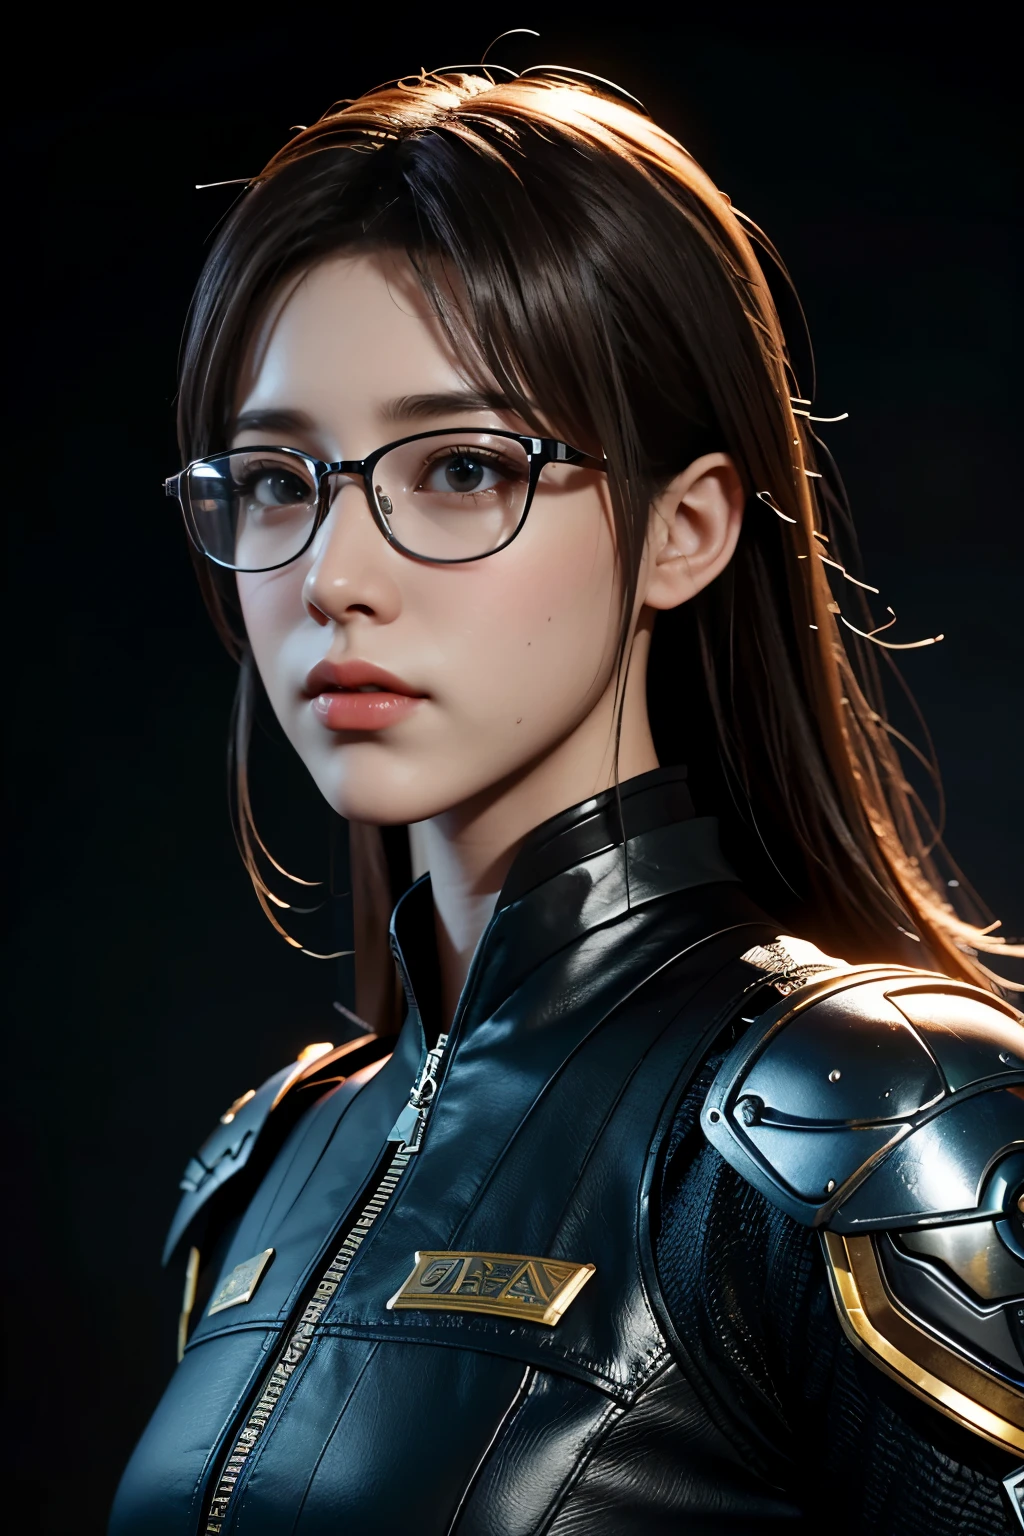 Masterpiece，The best qualities，Very high resolution，8K，((Portrait))，((Head close-up))，Original photo，real photo，Digital Photography， (Cyberpunk-style female cops of the future world)，(Fighting girl)，22-year-old girl，(Long hair in a casual style，blue)，An eye rich in detail，((Lachrymal nevus))，lip gloss，(Elegant and charming，Indifferent and noble)，(Future combat clothing full of mechanical style，A garment that combines the characteristics of a police uniform，A fancy badge，An intricate pattern of clothing，Glittering jewels，Joint Armor，Metallic luster，Power Armor，Red and white)，(Hologram glasses)，Cyberpunk Characters，Future Style， Photo poses，Street background，Movie lights，Ray tracing，Game CG，((3D Unreal Engine))，oc rendering reflection texture